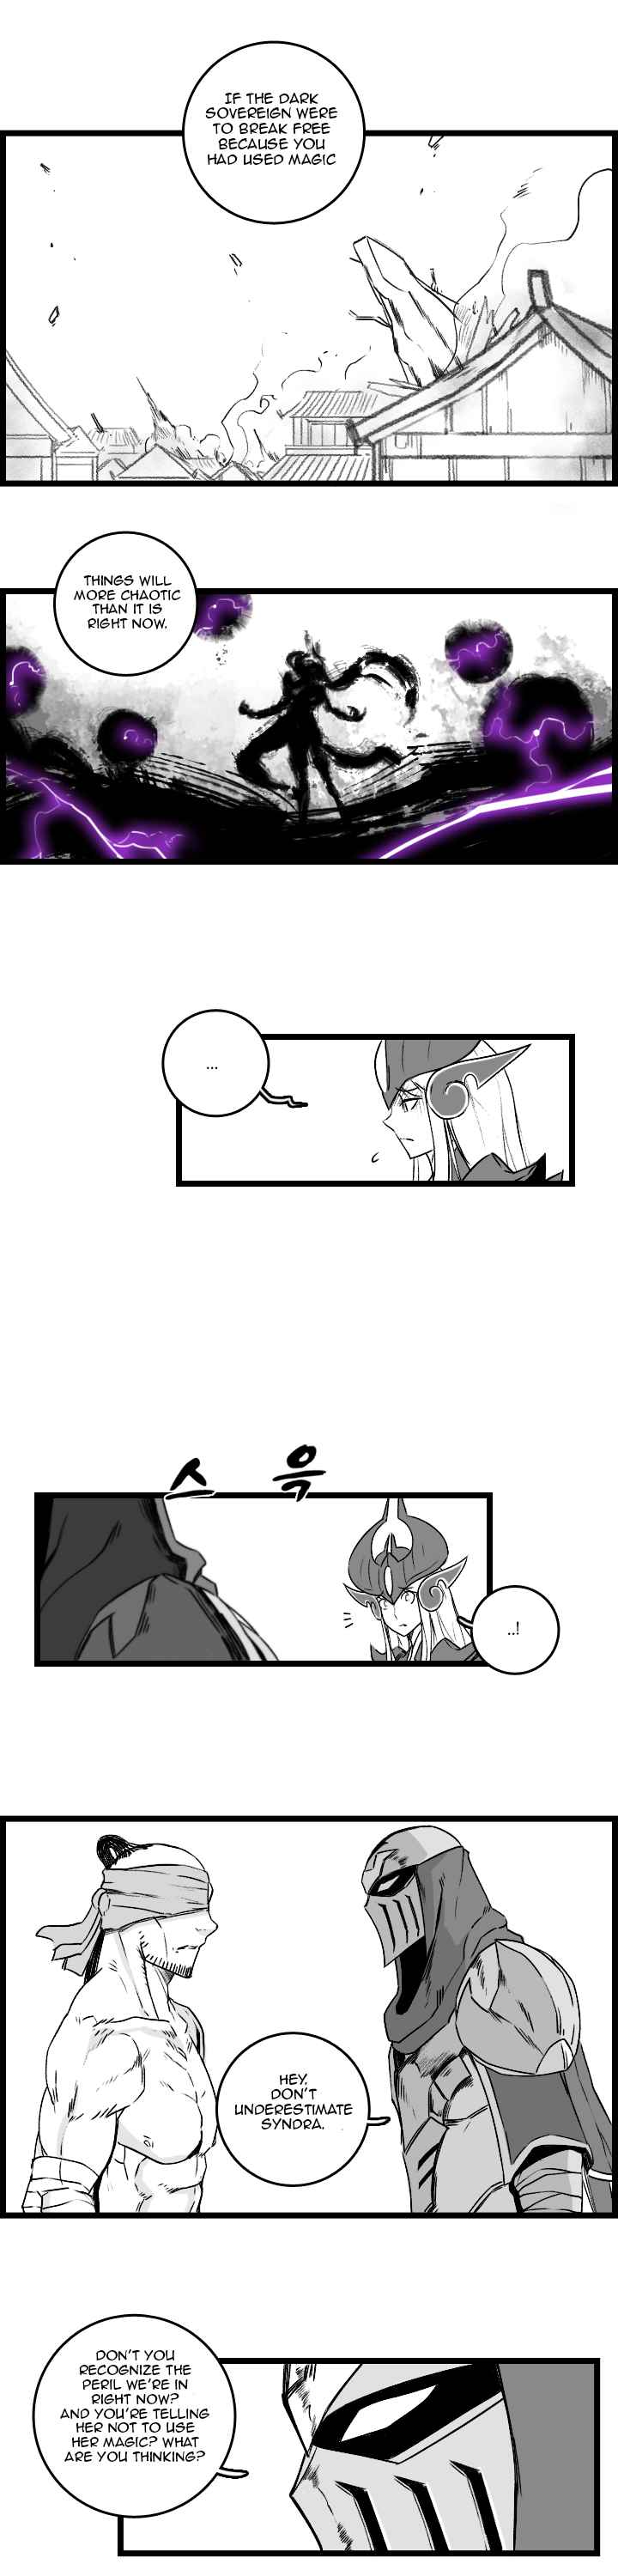 League of Legends Syndra & Zed's Everyday Life (Doujinshi) Vol. 3 Ch. 37